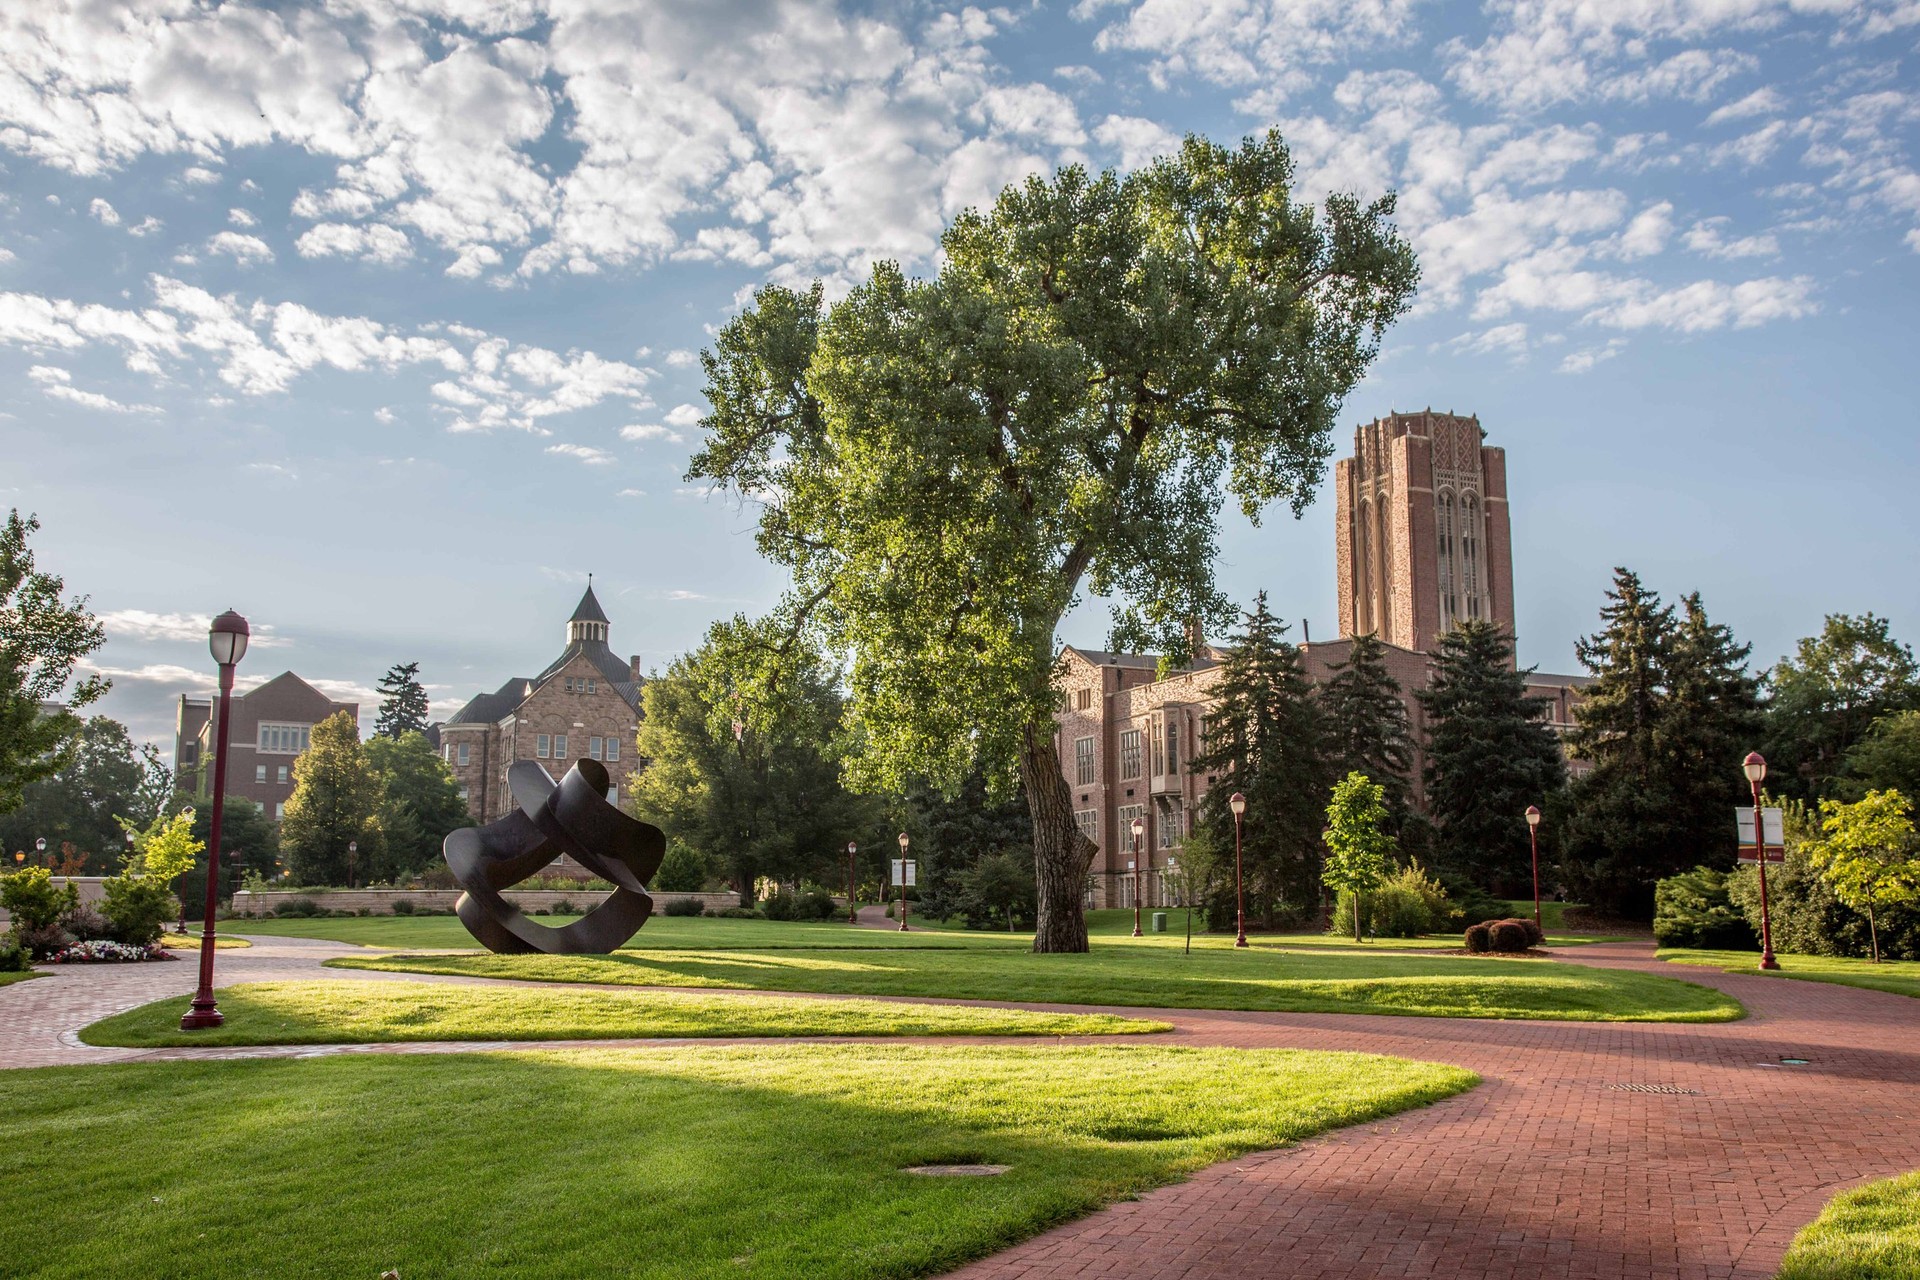 Red brick paths and grassy quads line the campus of University of Denver